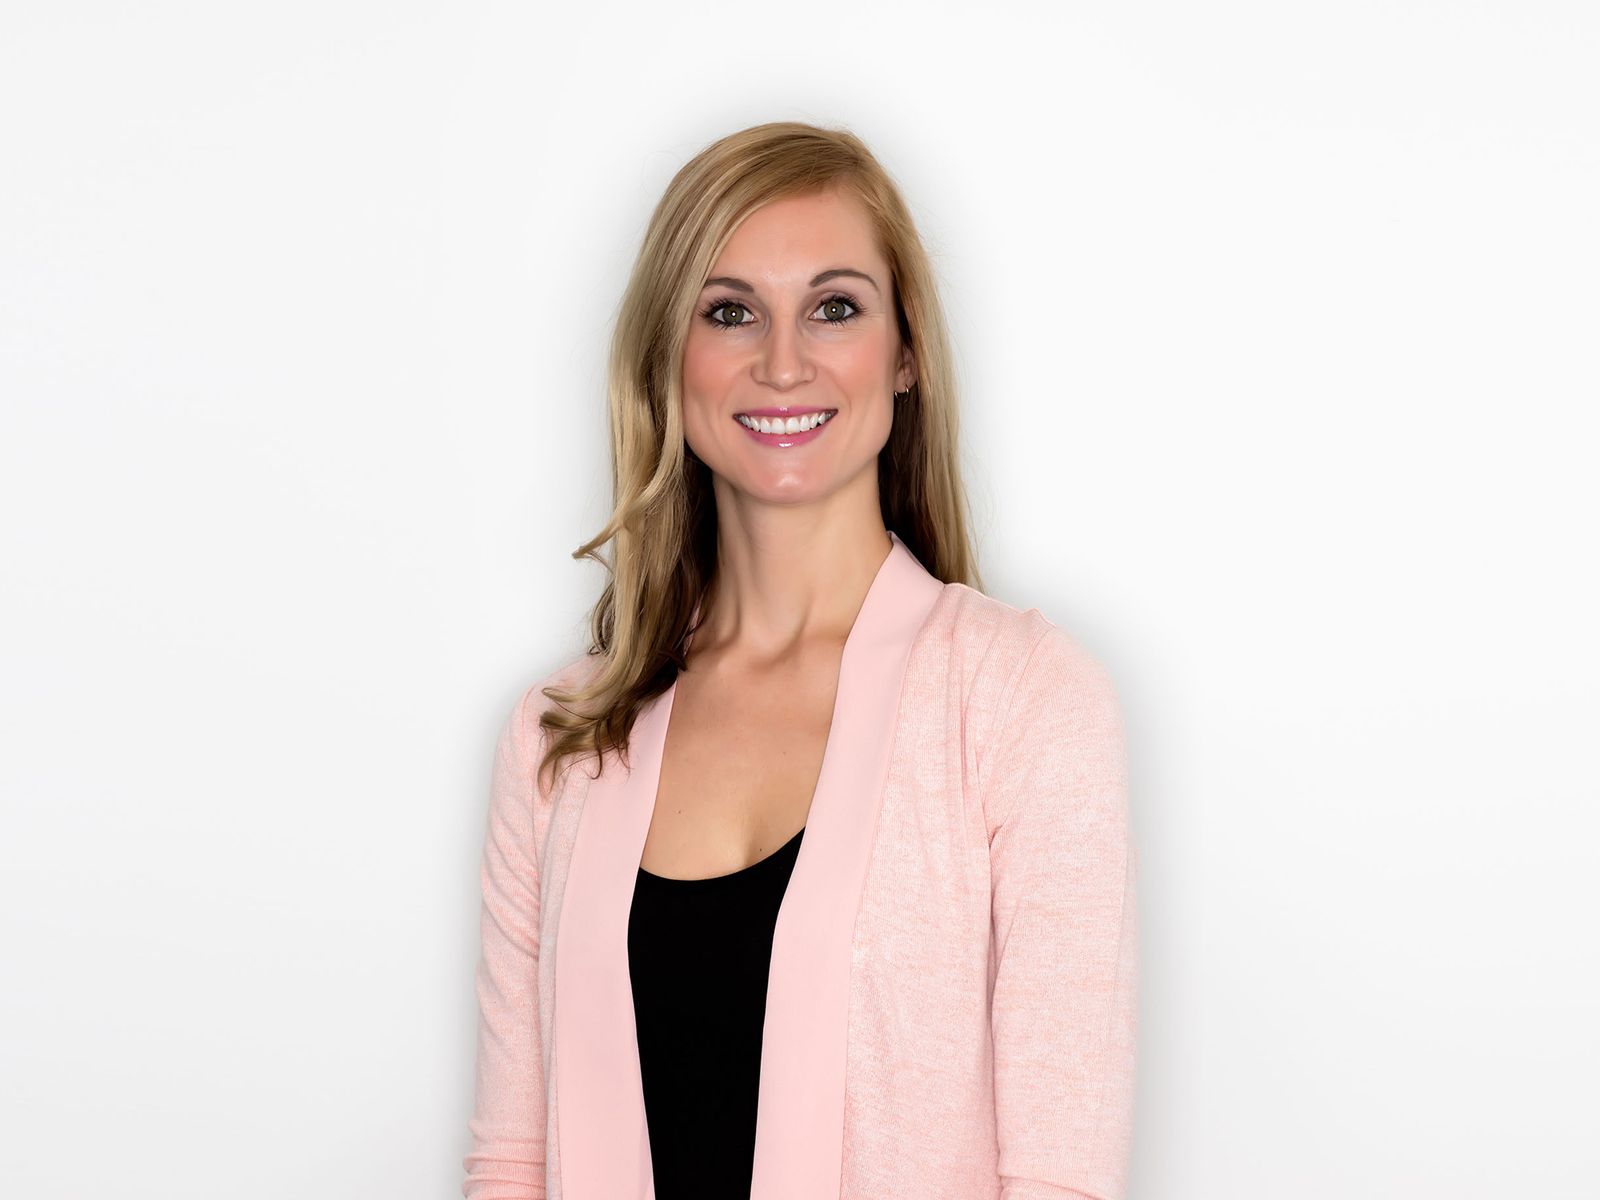 Welcome to 460 Realty, Danielle Armet